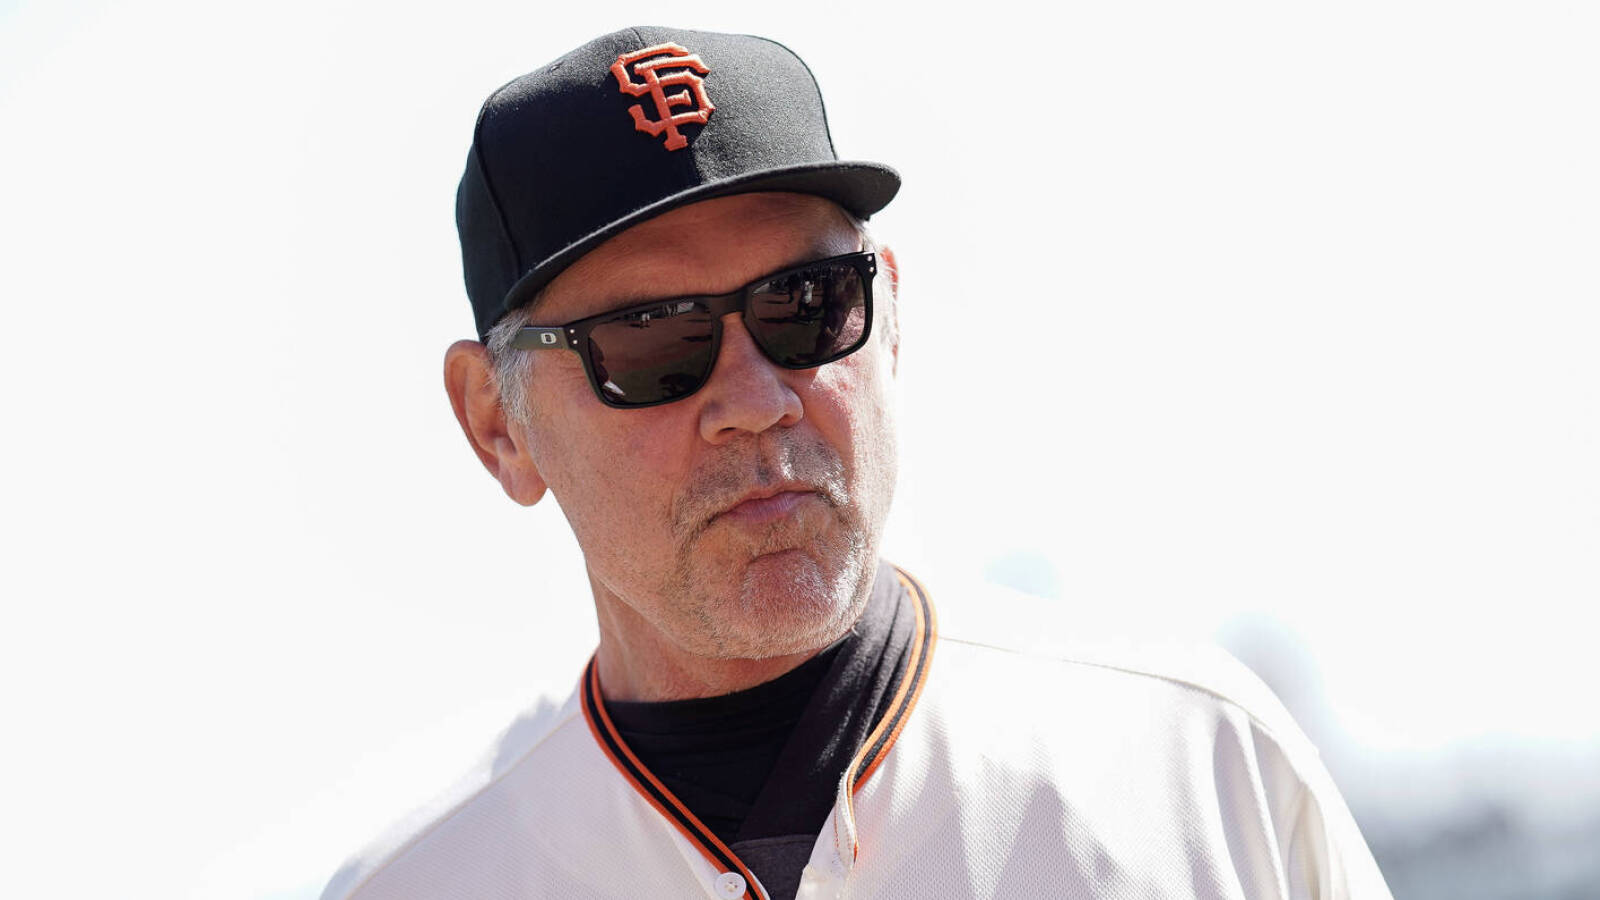 Rangers hire Bruce Bochy as new manager on three-year deal